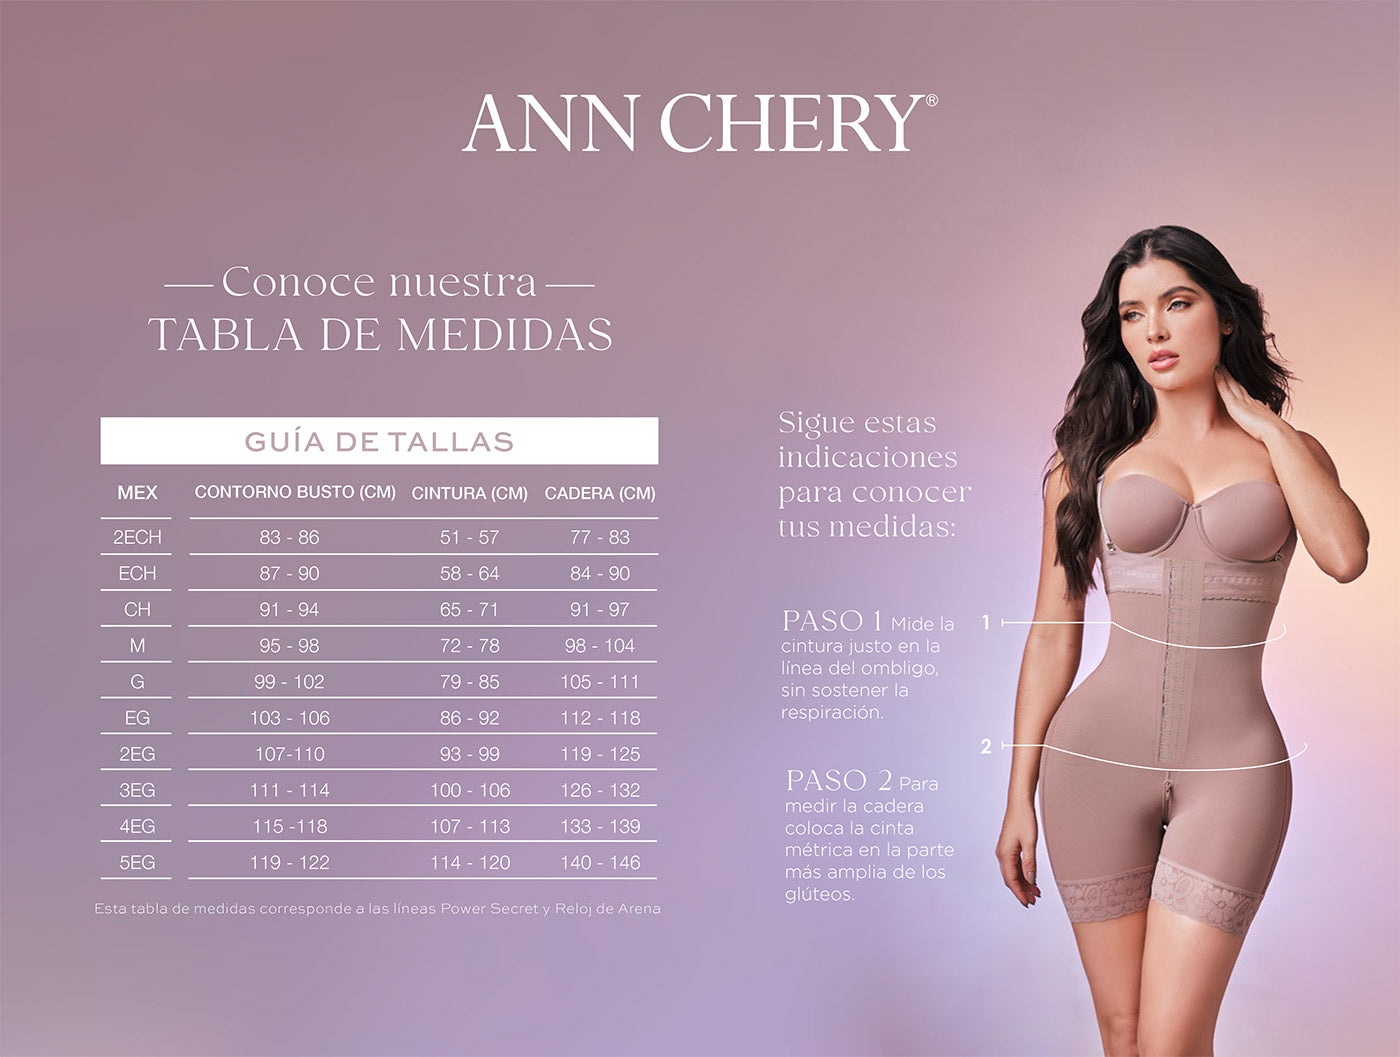 Colombian Hourglass Girdle with 7 Ribs | Melibelt Girdles